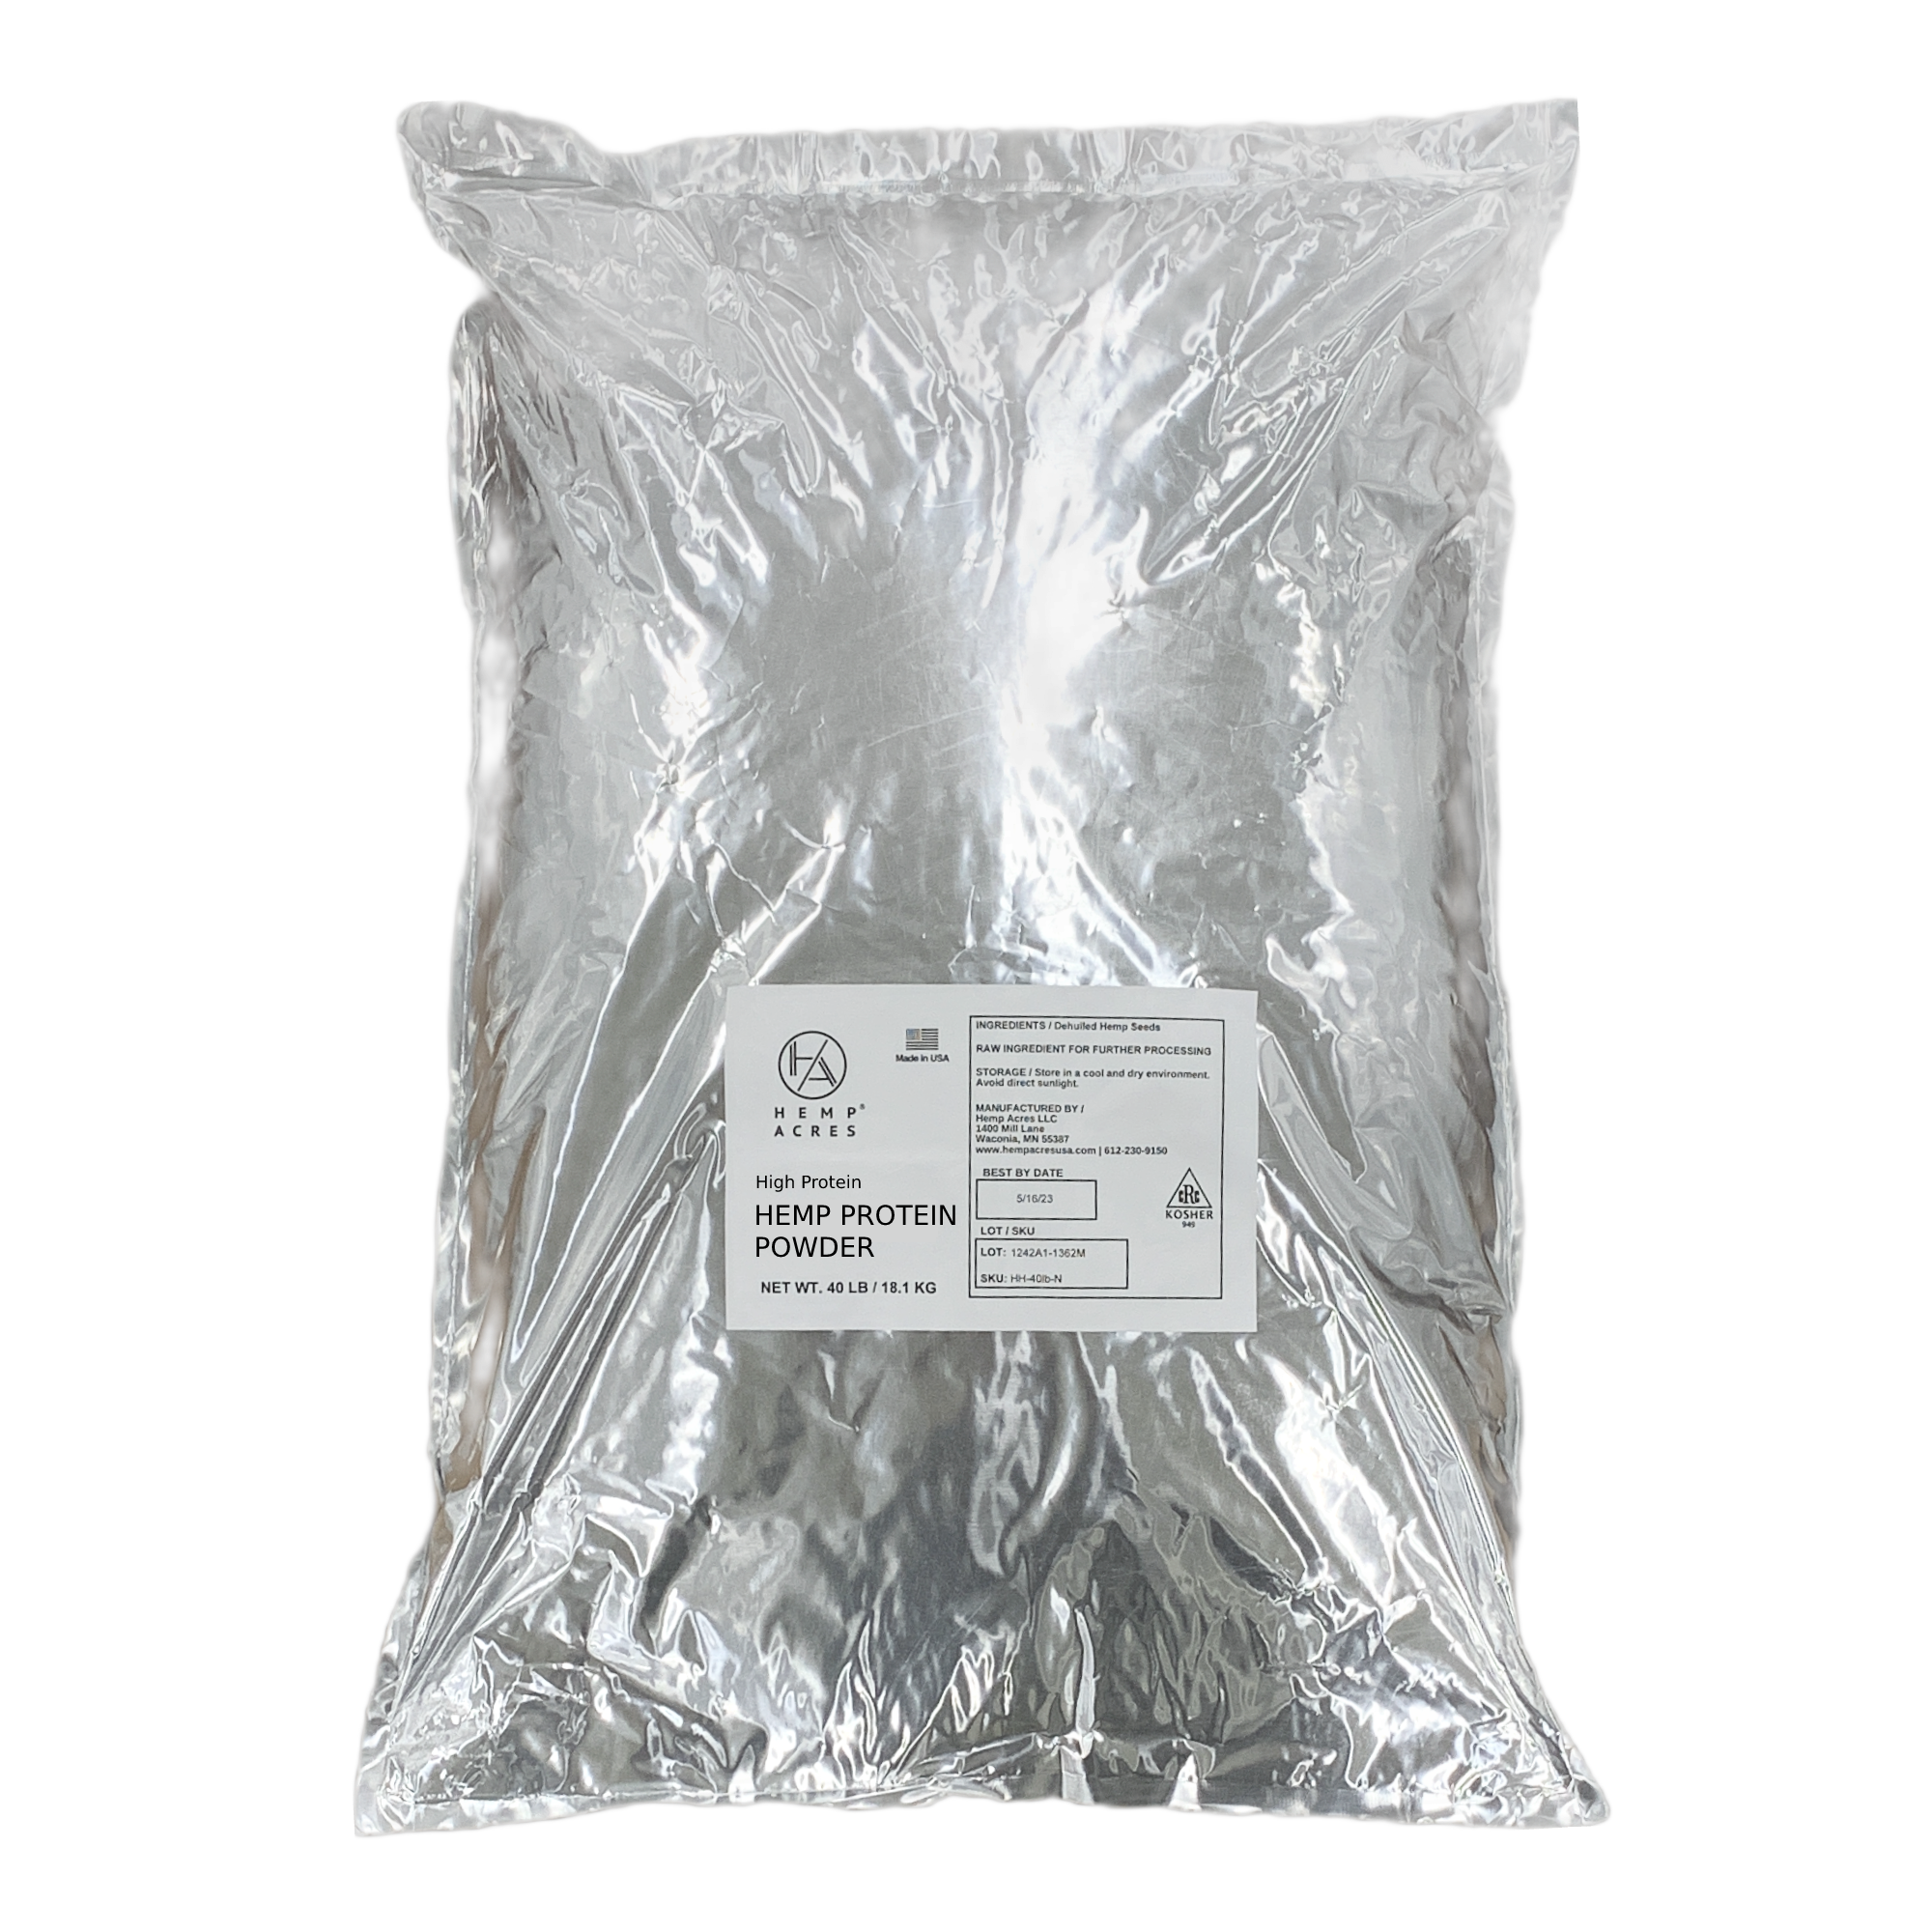 Photo of a 40 pound silver foil bag of protein powder